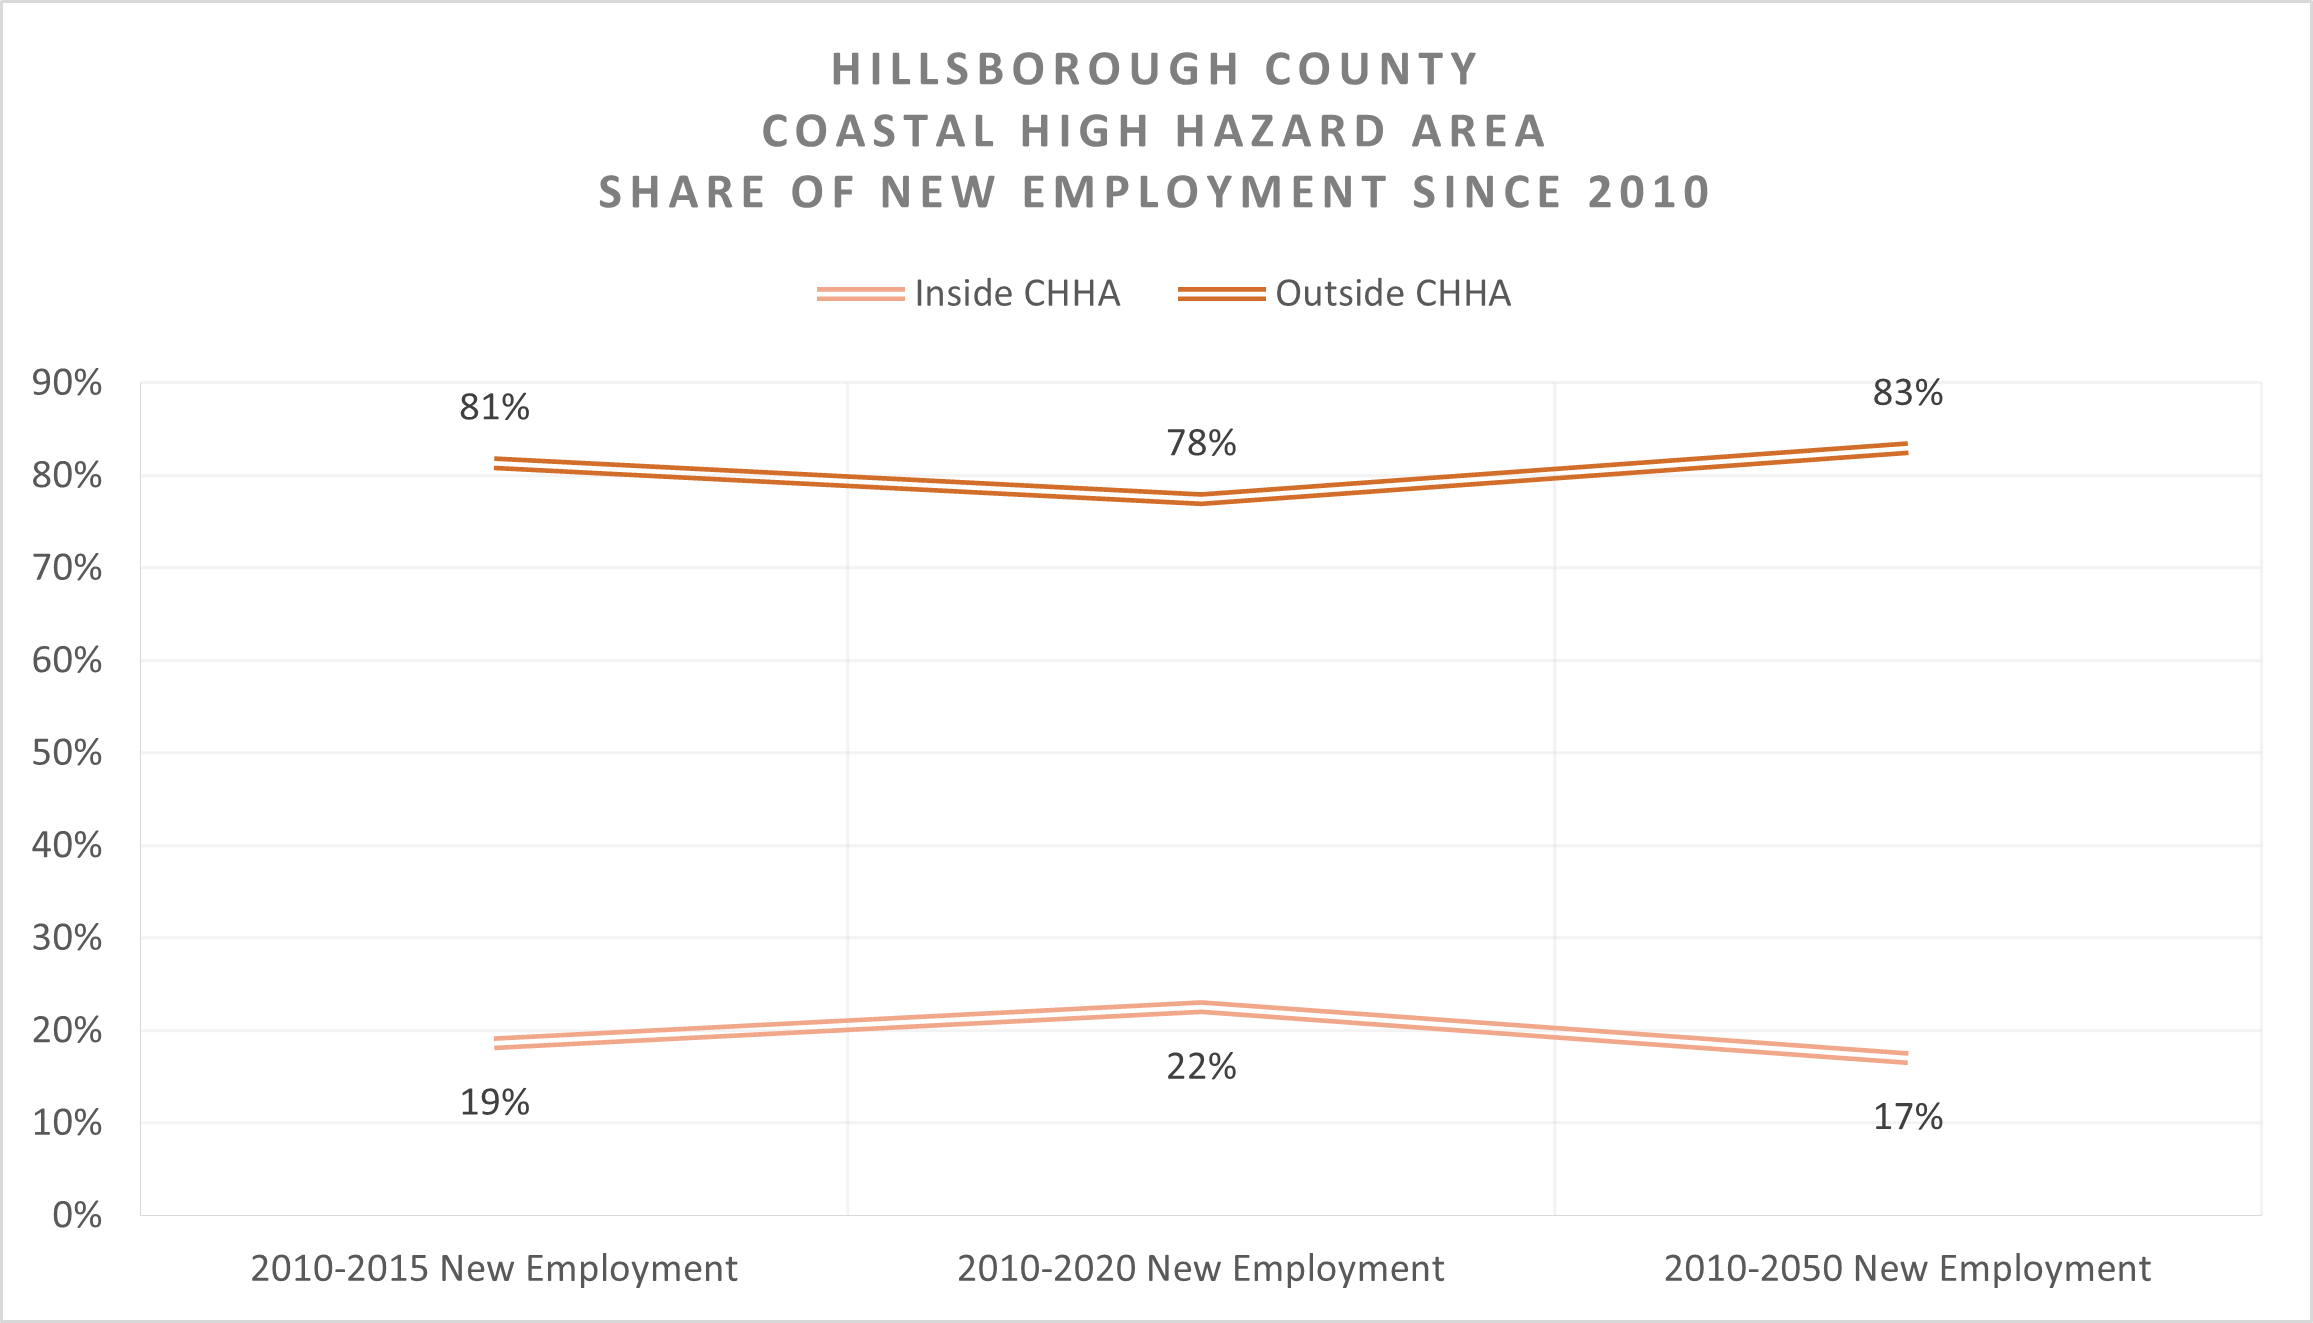 This chart shows Hillsborough County's new jobs inside and outside the CHHA. From 2010 to 2020, 22% of the new jobs moved inside the CHHA and 78% of new jobs moved outside CHHA. From 2010 to 2050, the share are expected to change. Namely, 17% of the new jobs are expected to move inside the CHHA and 83% of the new jobs are expected to move outside CHHA.